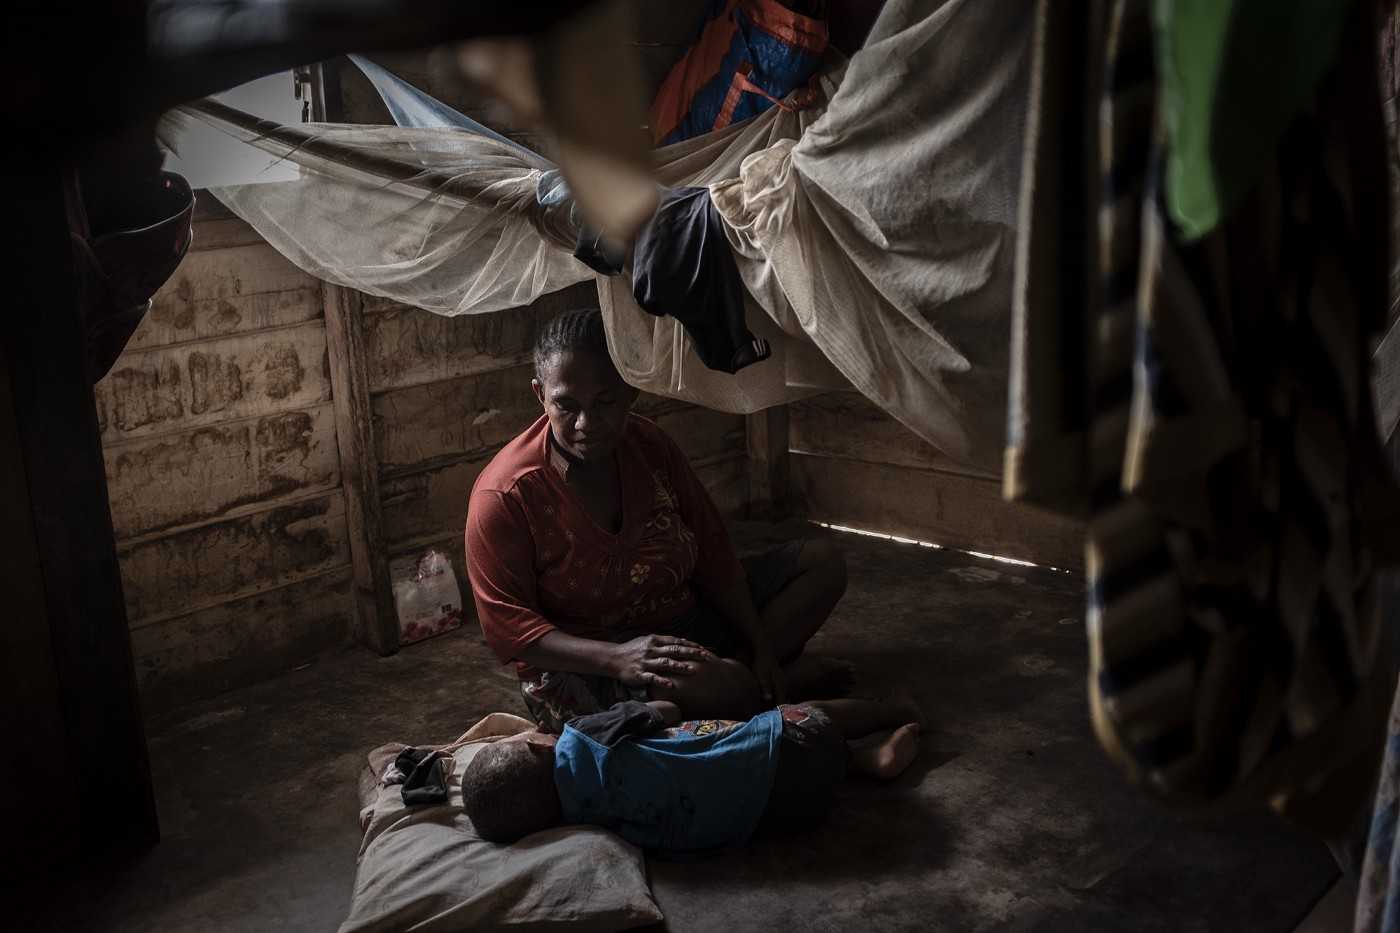 Angela, 29, tends to her youngest child at their home in Boven Digoel.